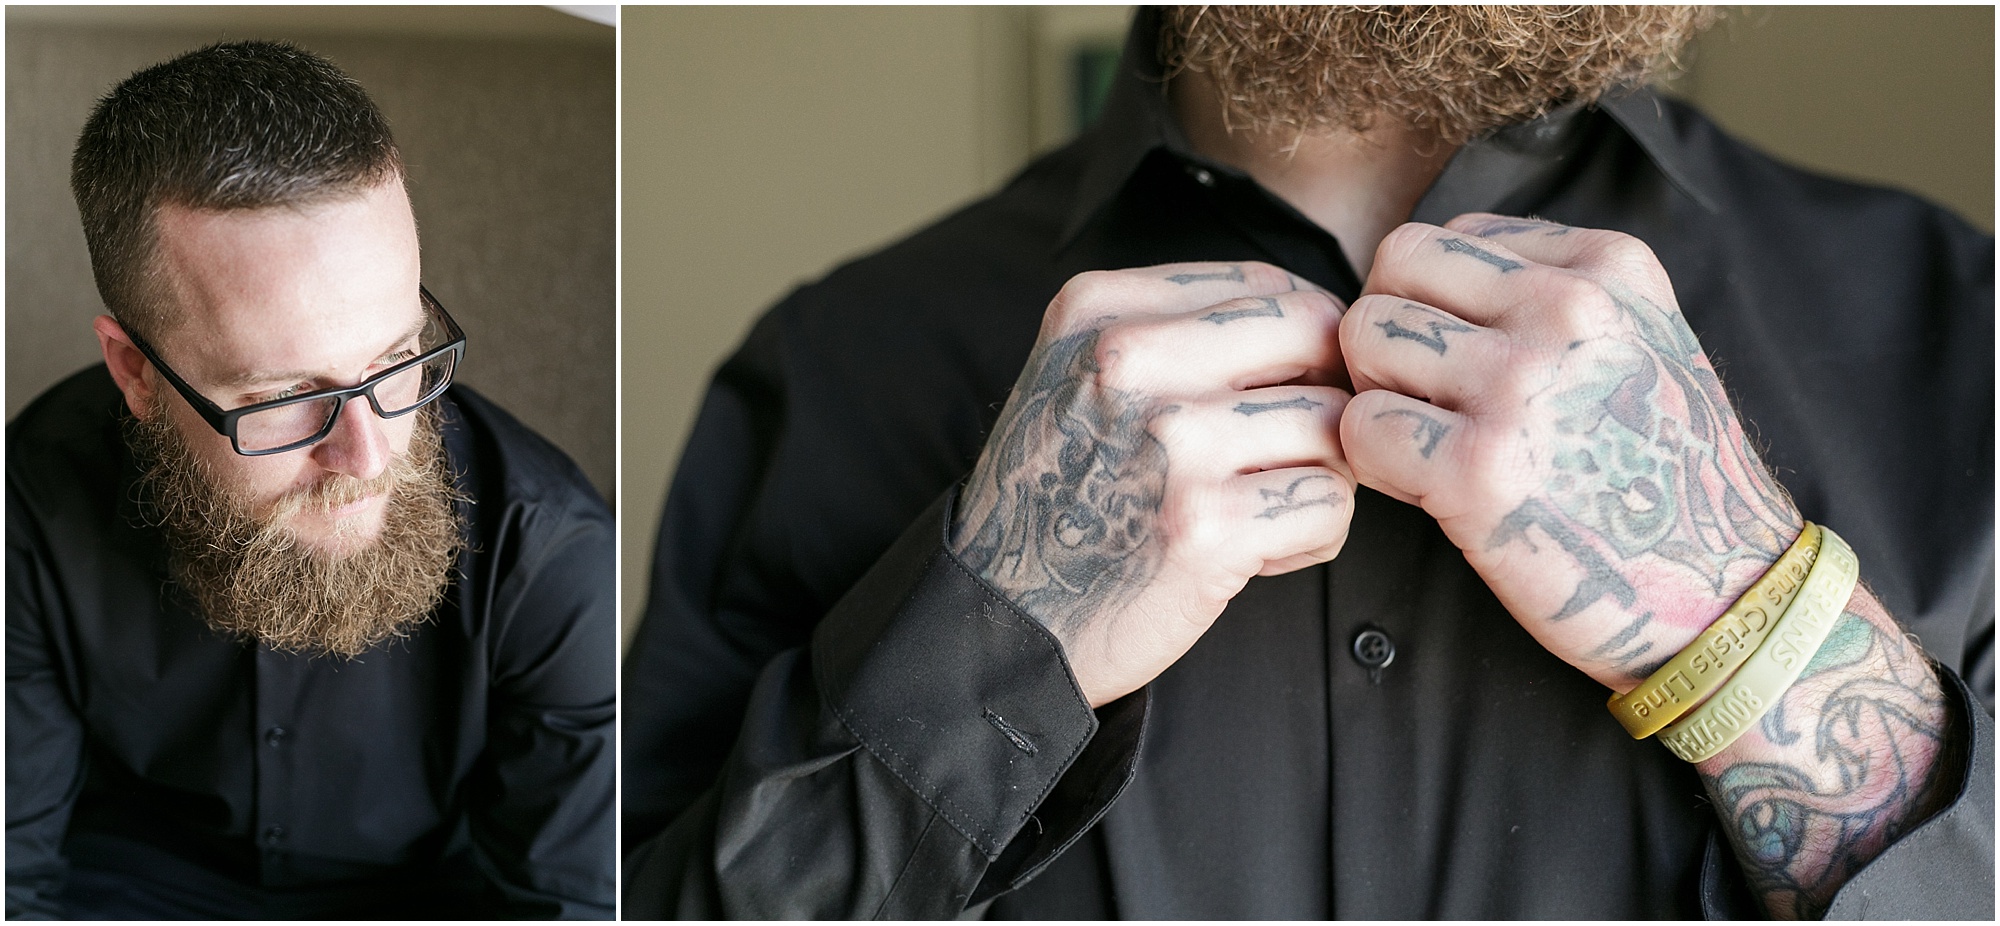 Guy with tattoos buttoning up his shirt while getting ready for wedding.